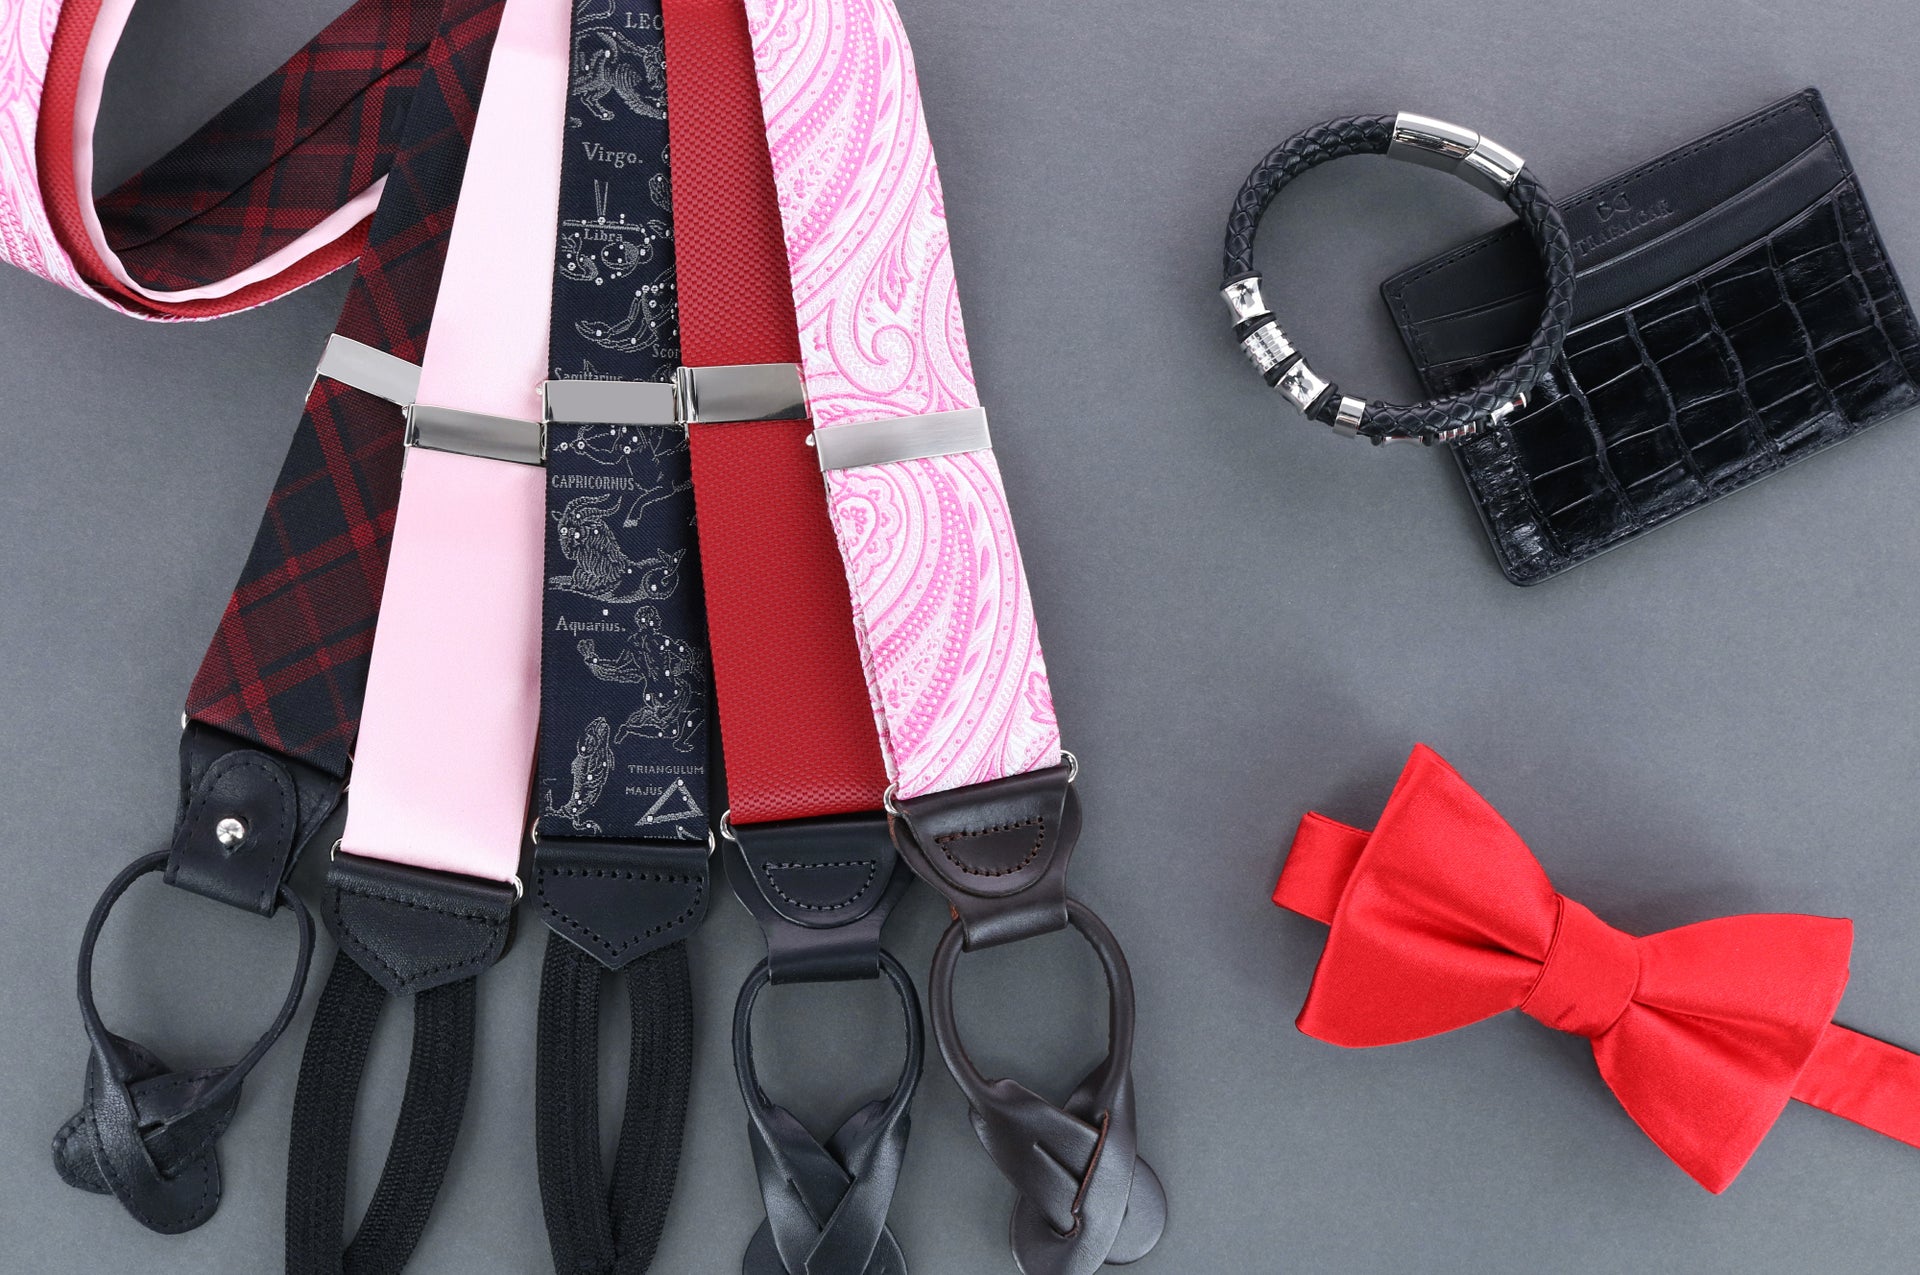 Five pairs of braces, a bow tie, leather bracelet and card holder